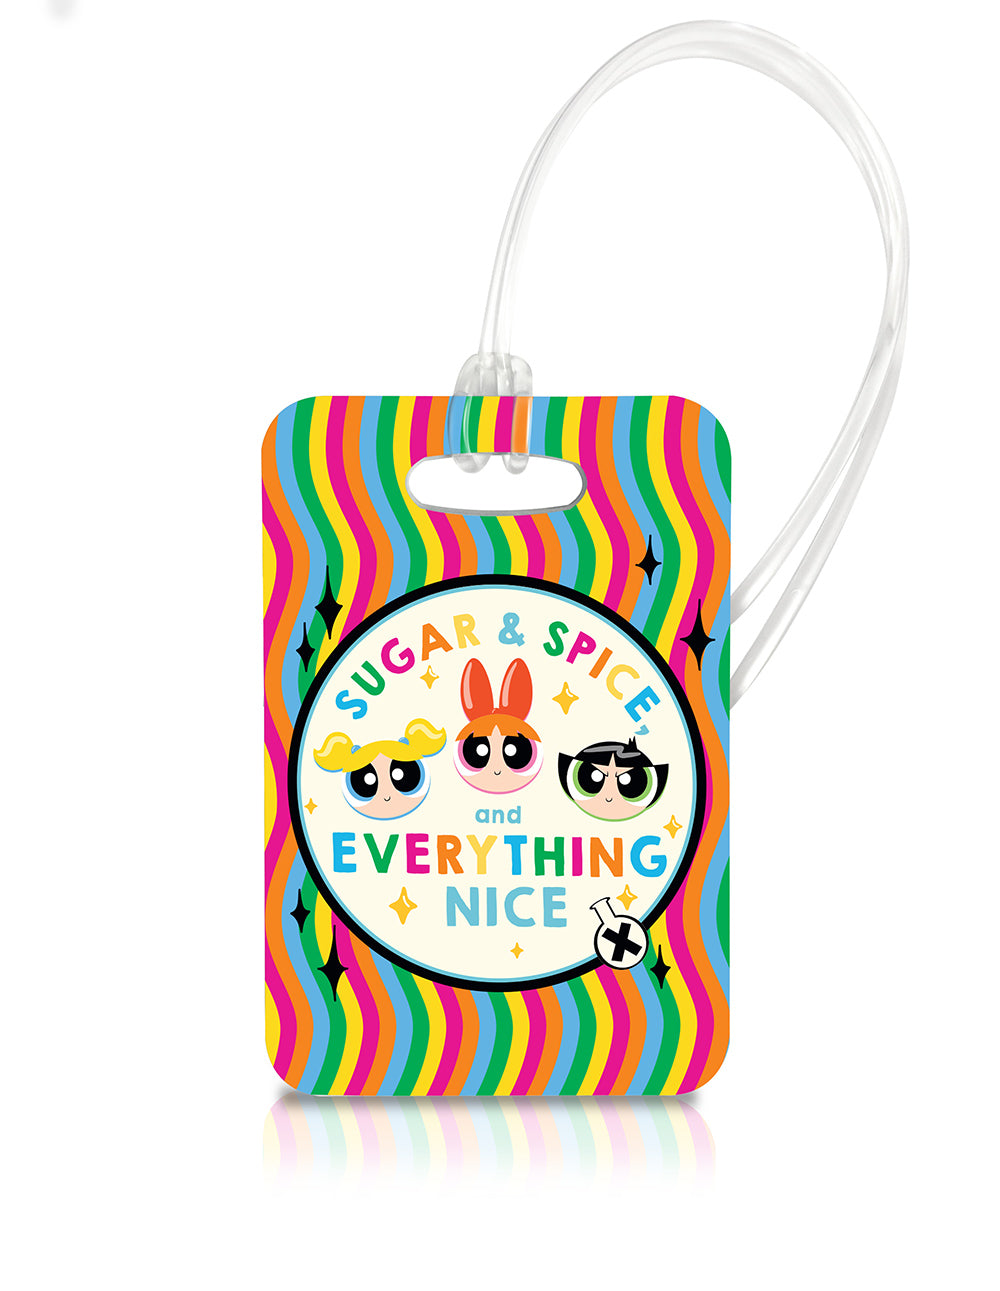 The Powerpuff Girls (Sugar Spice and Everything Nice) Luggage Tag LTREC089